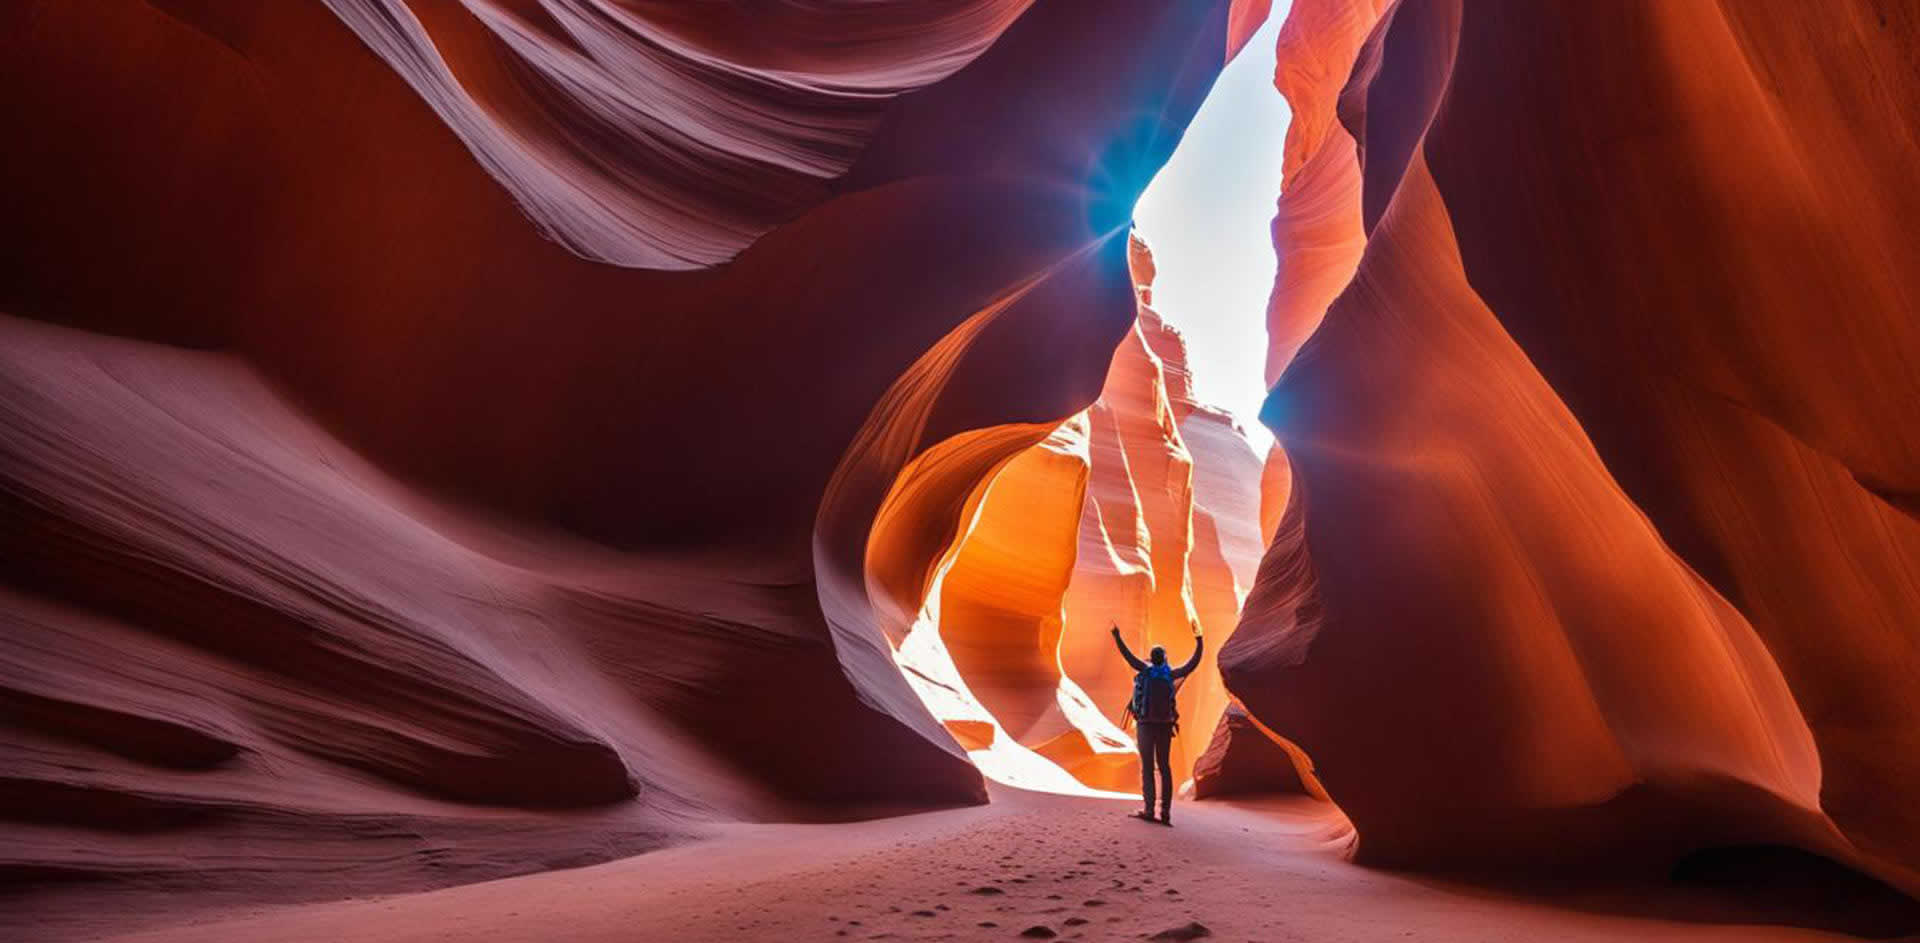 Respecting the majestic Antelope Canyon